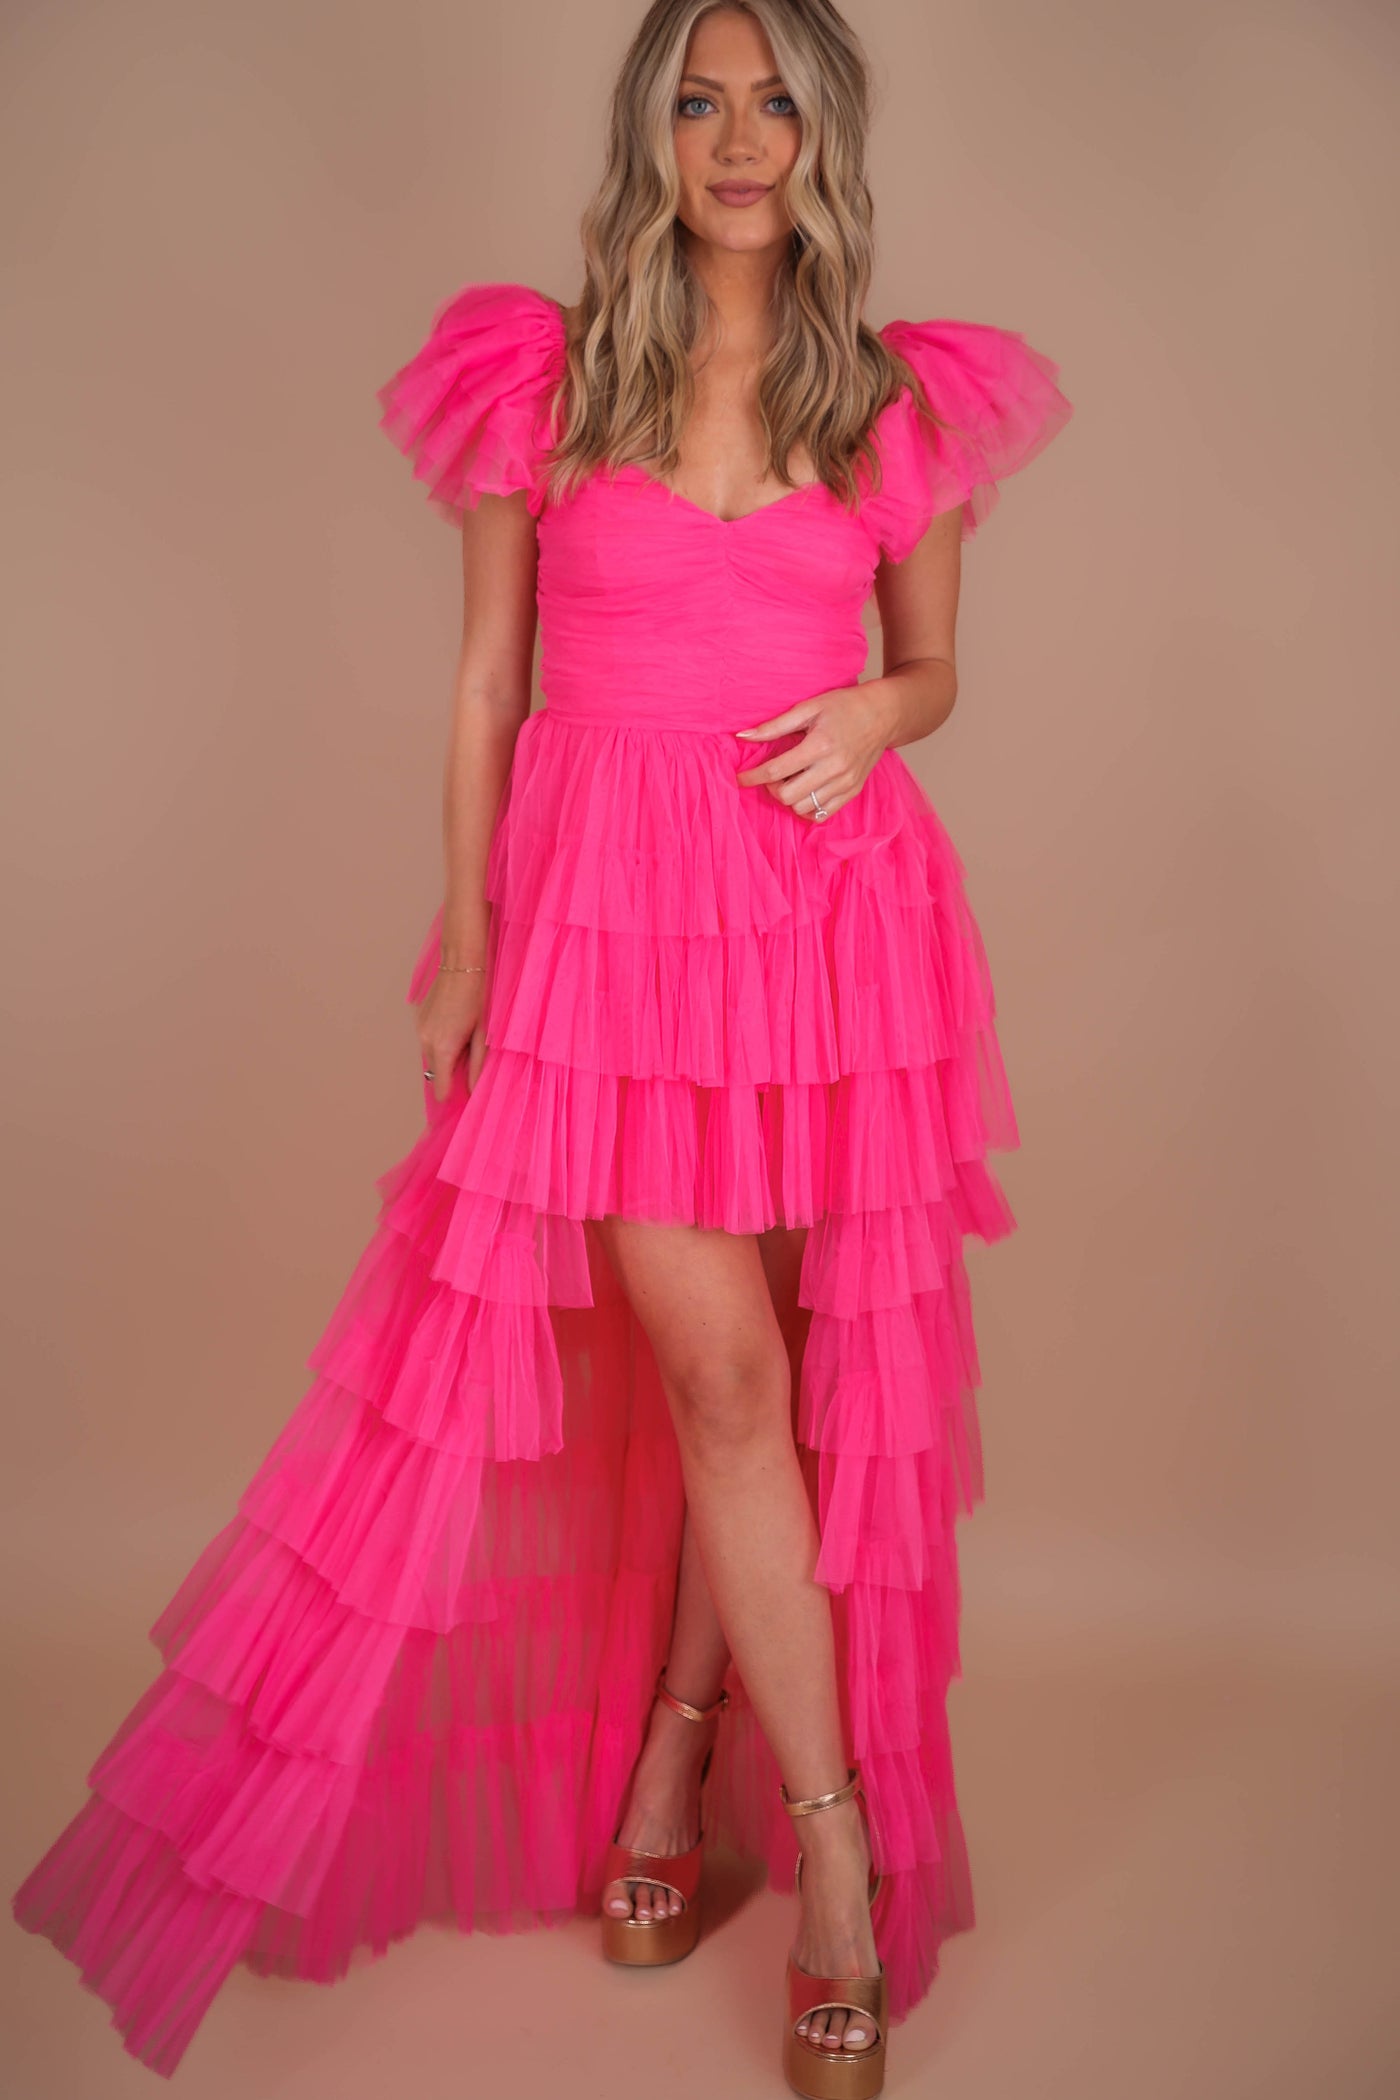 Women's Tulle Gown- Women's Hot Pink Tulle Maxi Dress- Luxxel Tulle Off The Shoulder Maxi 